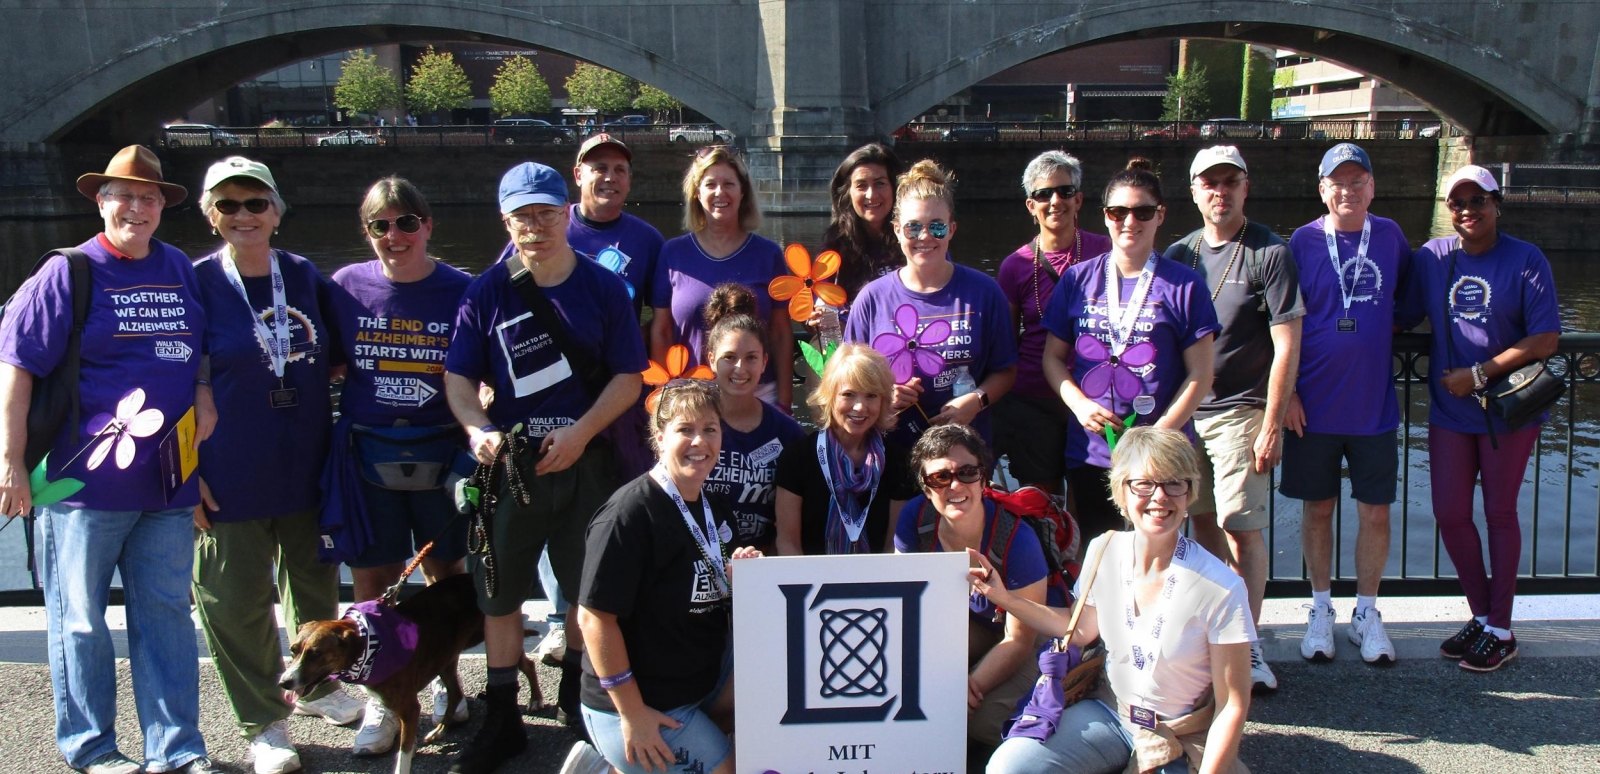 Since 2009 the Lincoln Laboratory Alzheimer Support Community has raised $235,000 and has consistently ranked among the top five teams in the region during the Greater Boston Walk to End Alzheimer’s.